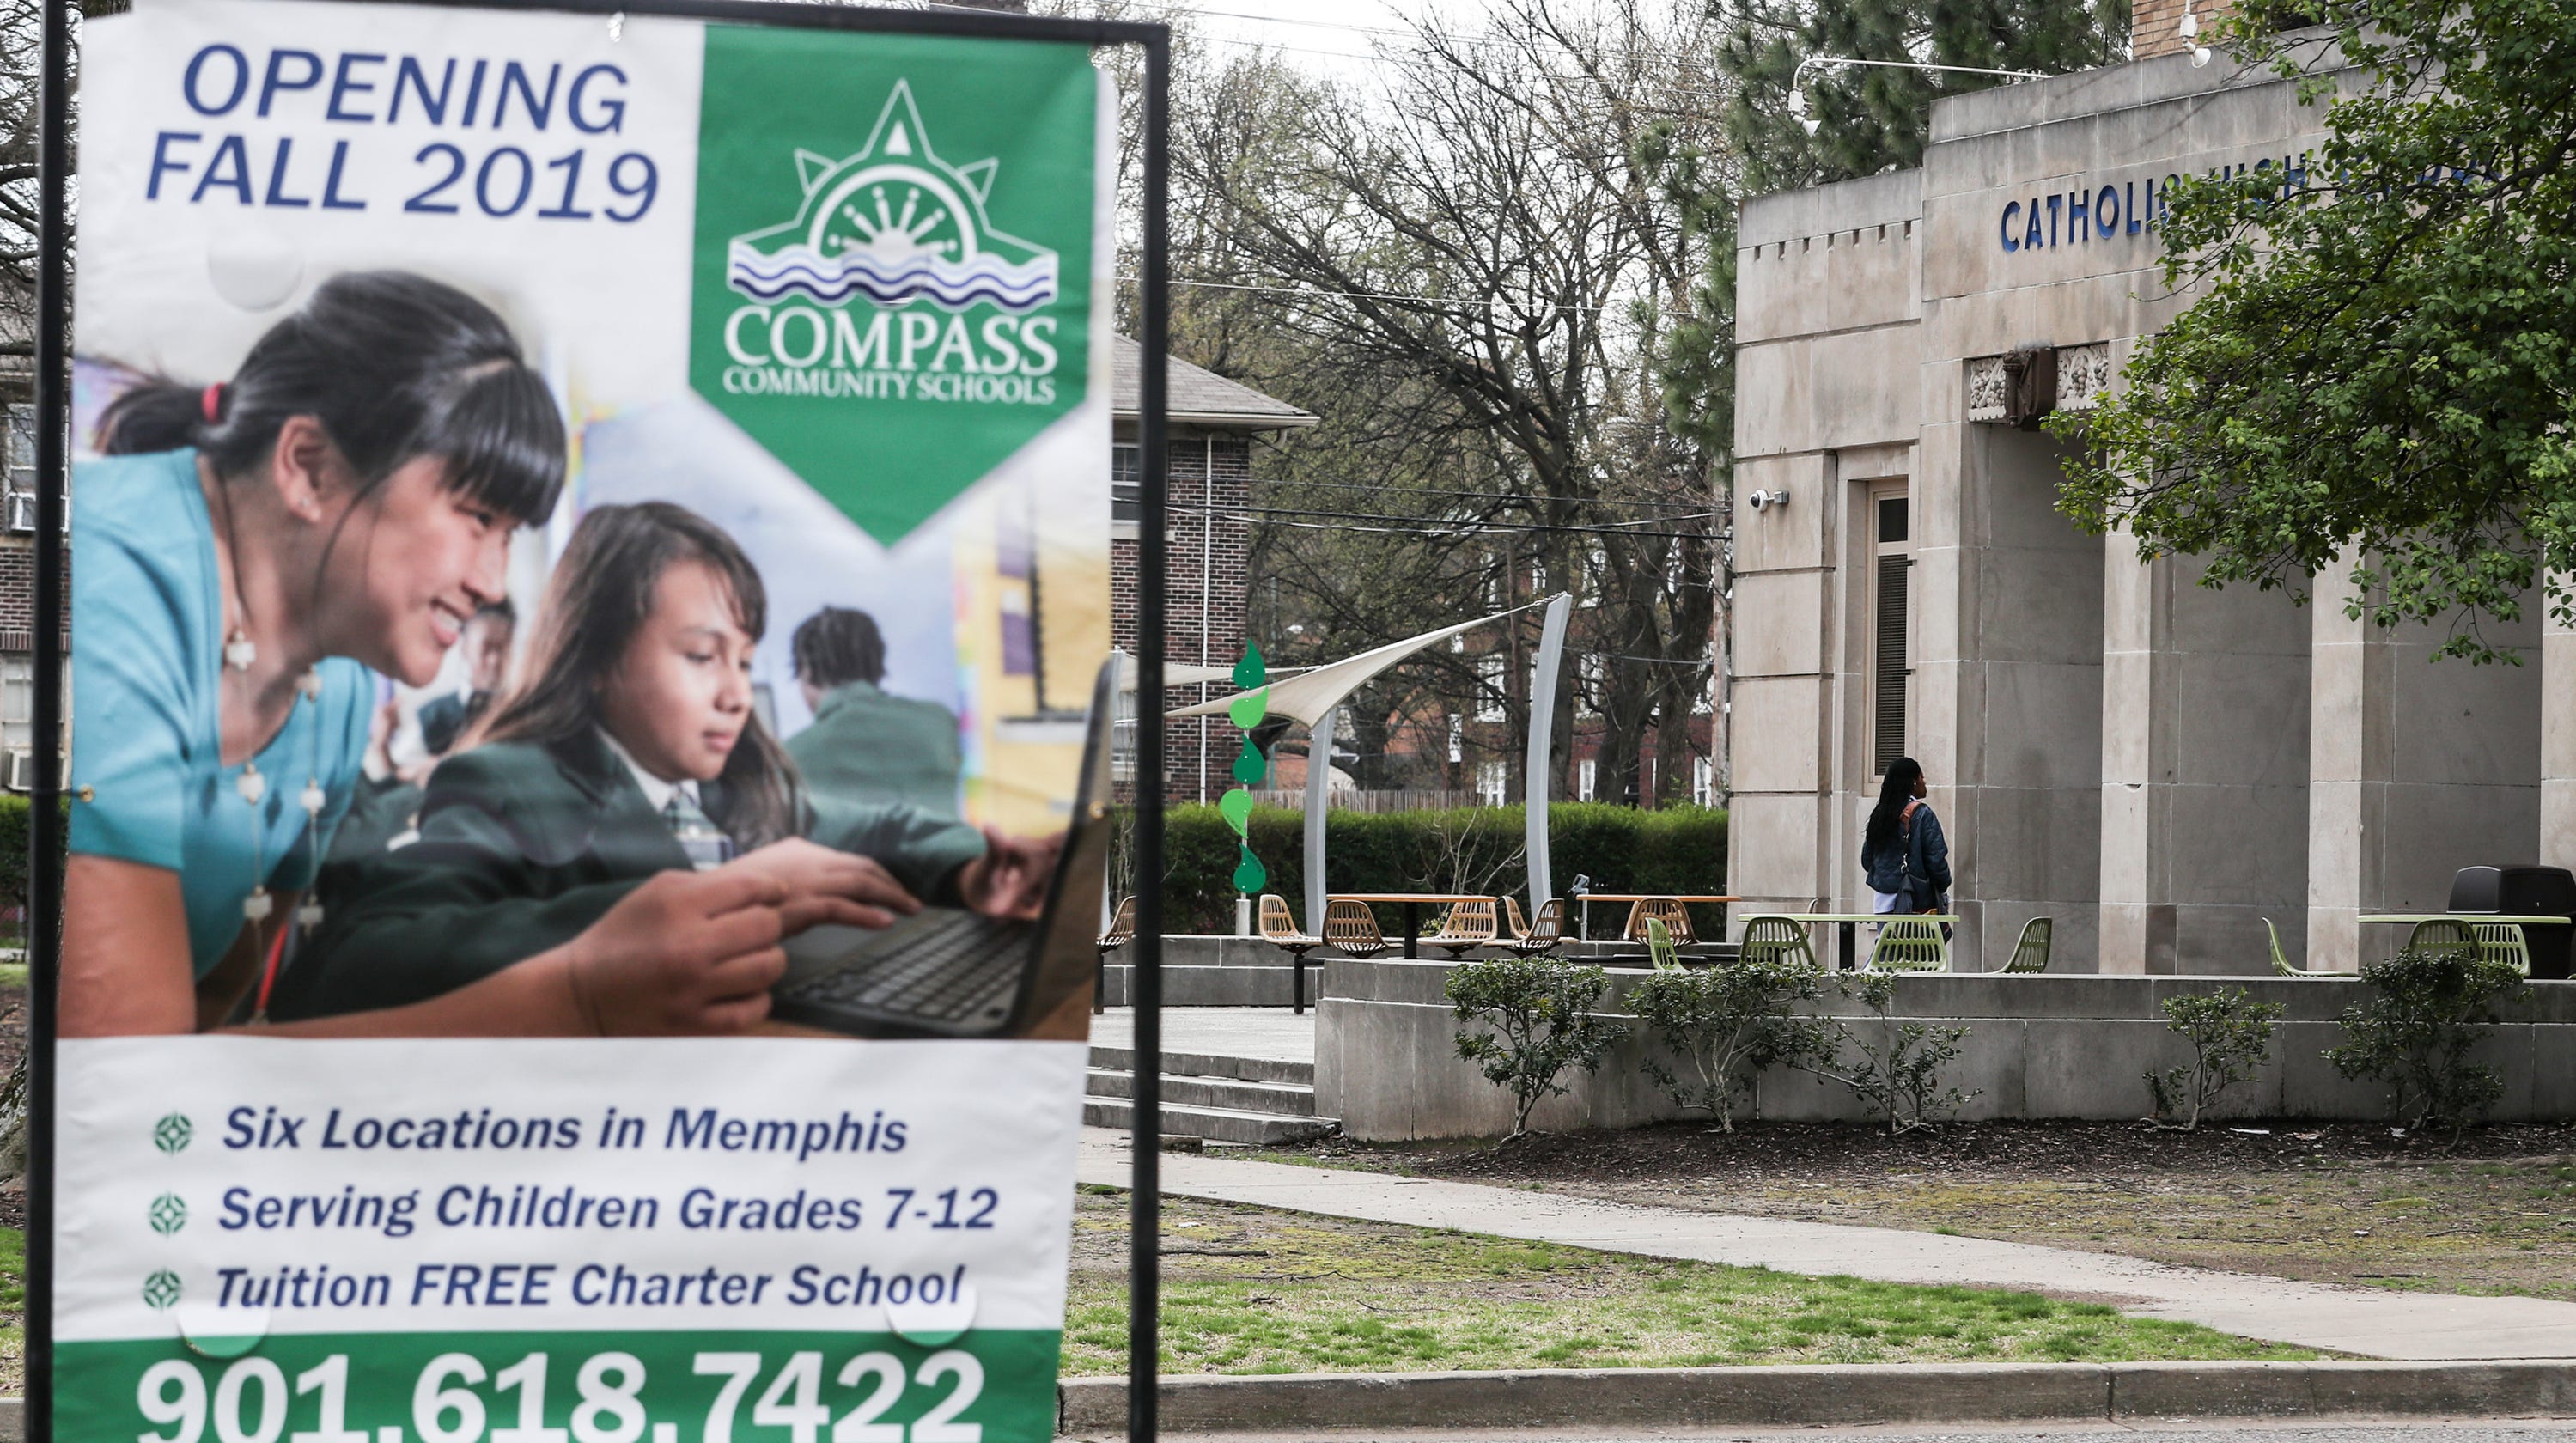 Memphis charter schools respond to legal threat over Catholic Church’s morality clause